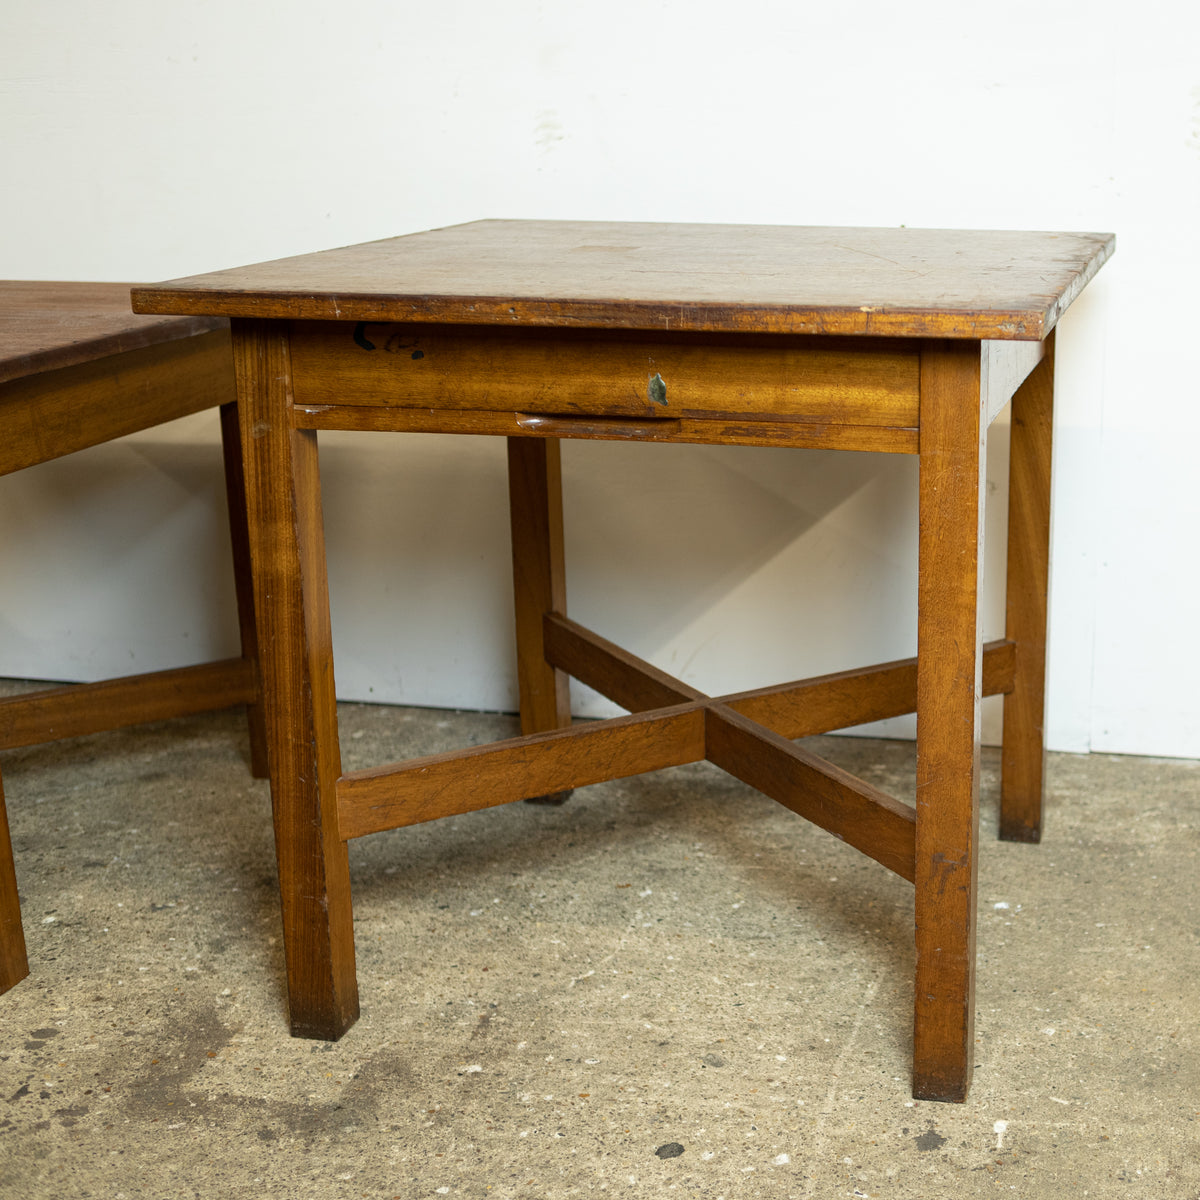 Reclaimed Vintage Solid Teak Square Tables | Desks with Drawer (many available) | The Architectural Forum